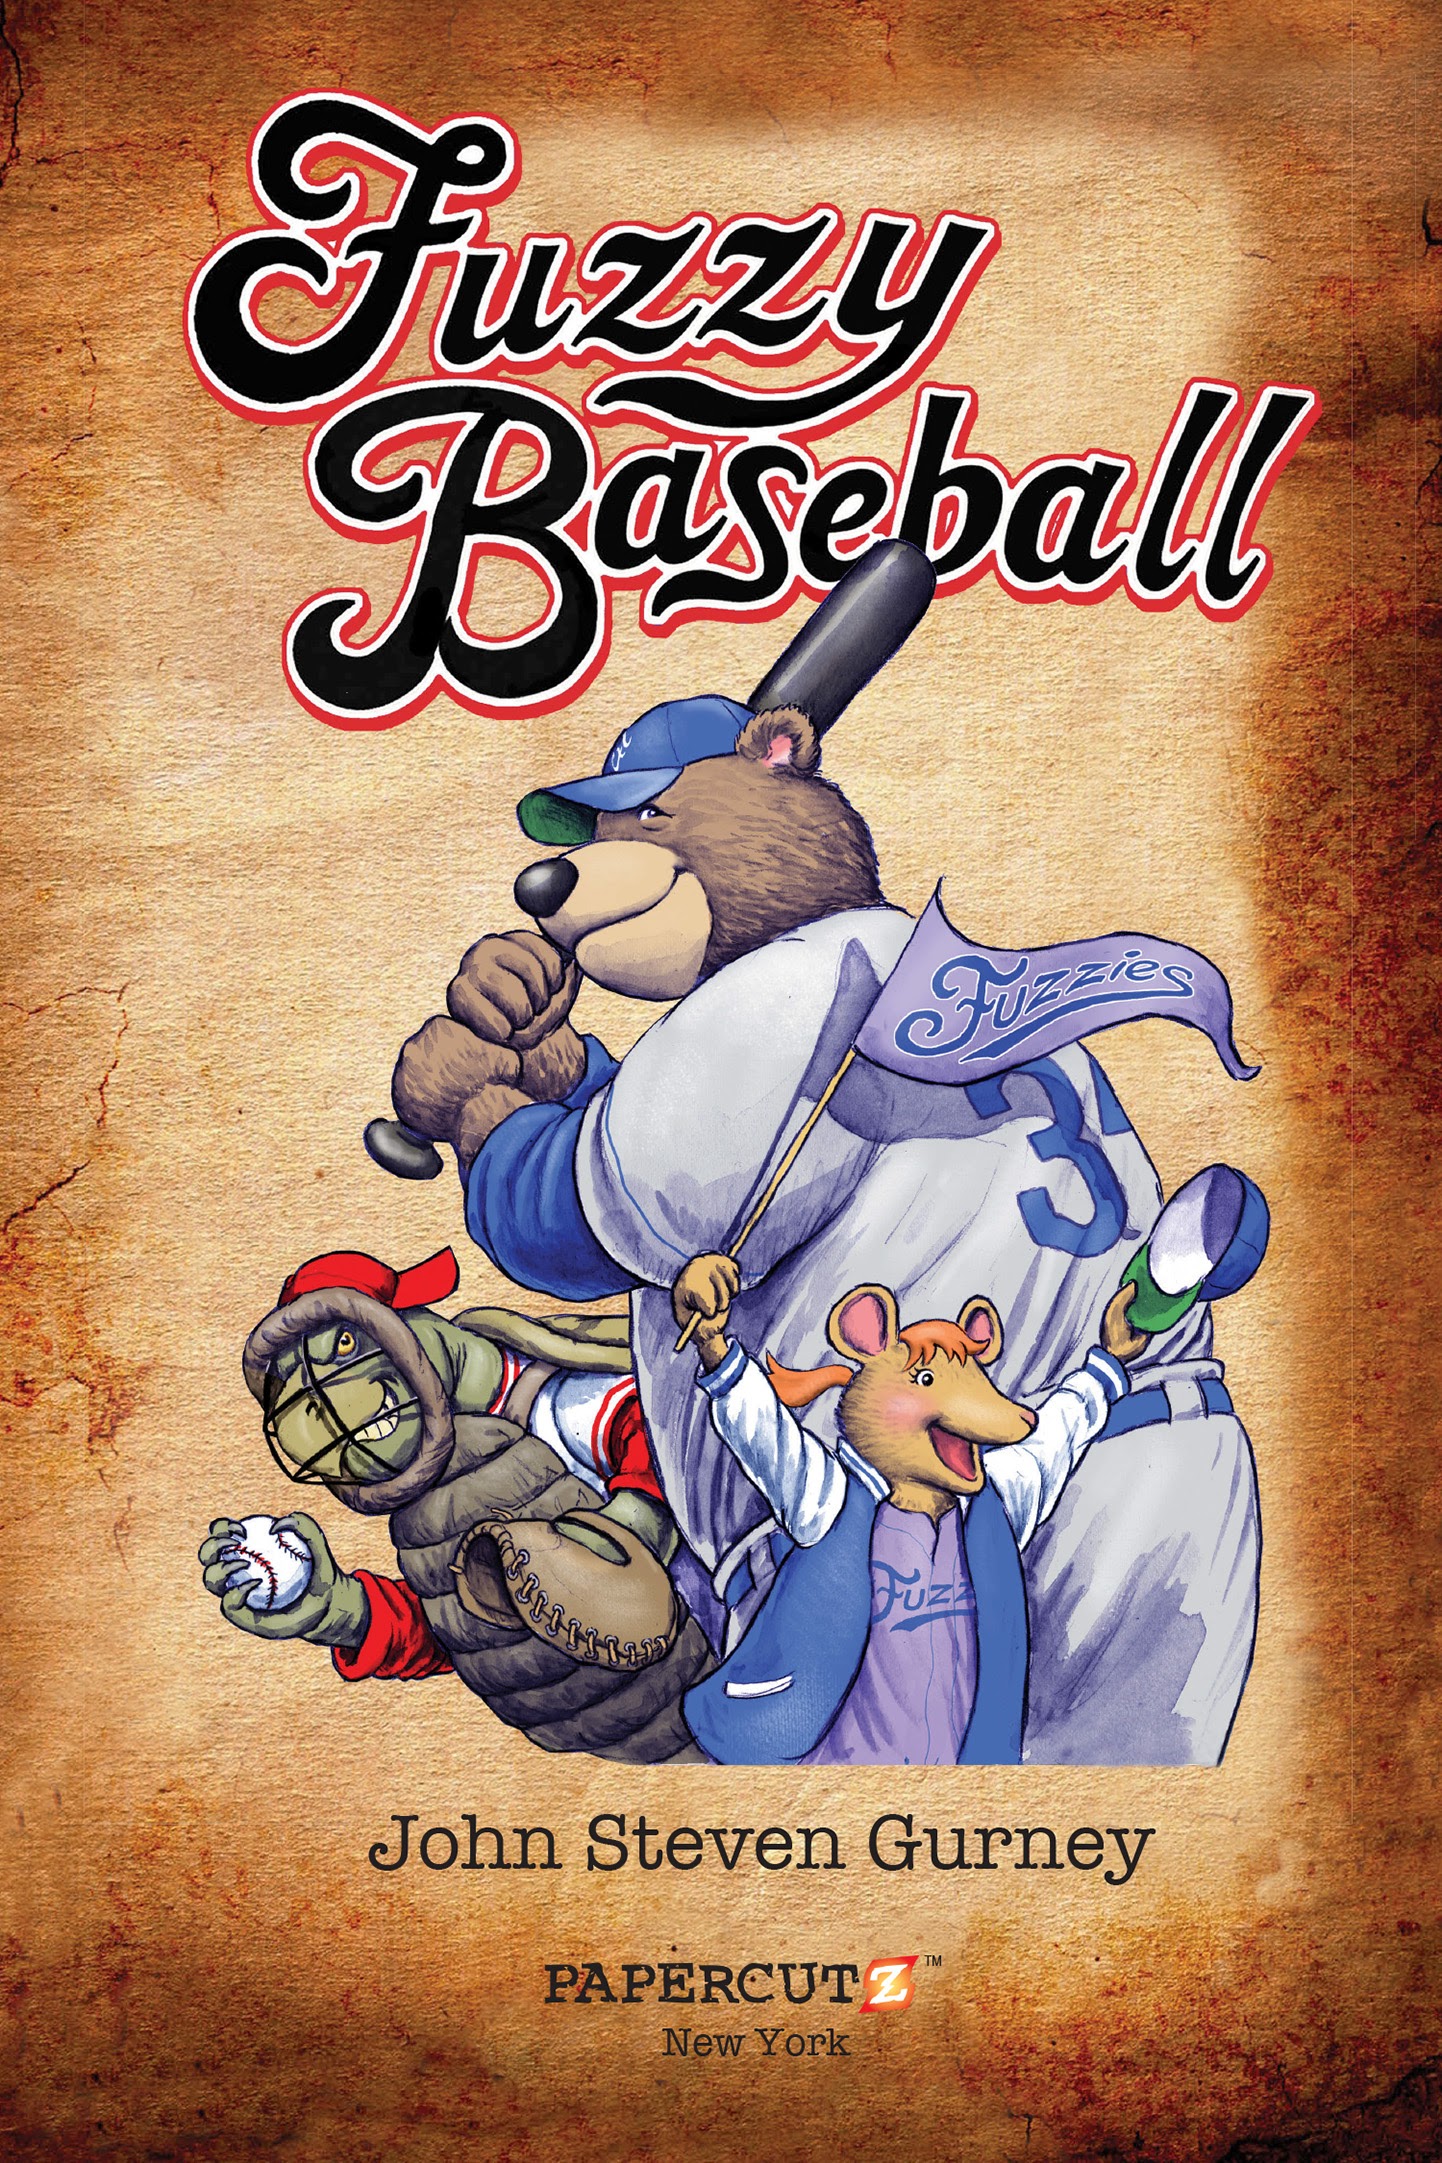 Read online Fuzzy Baseball comic -  Issue #1 - 3